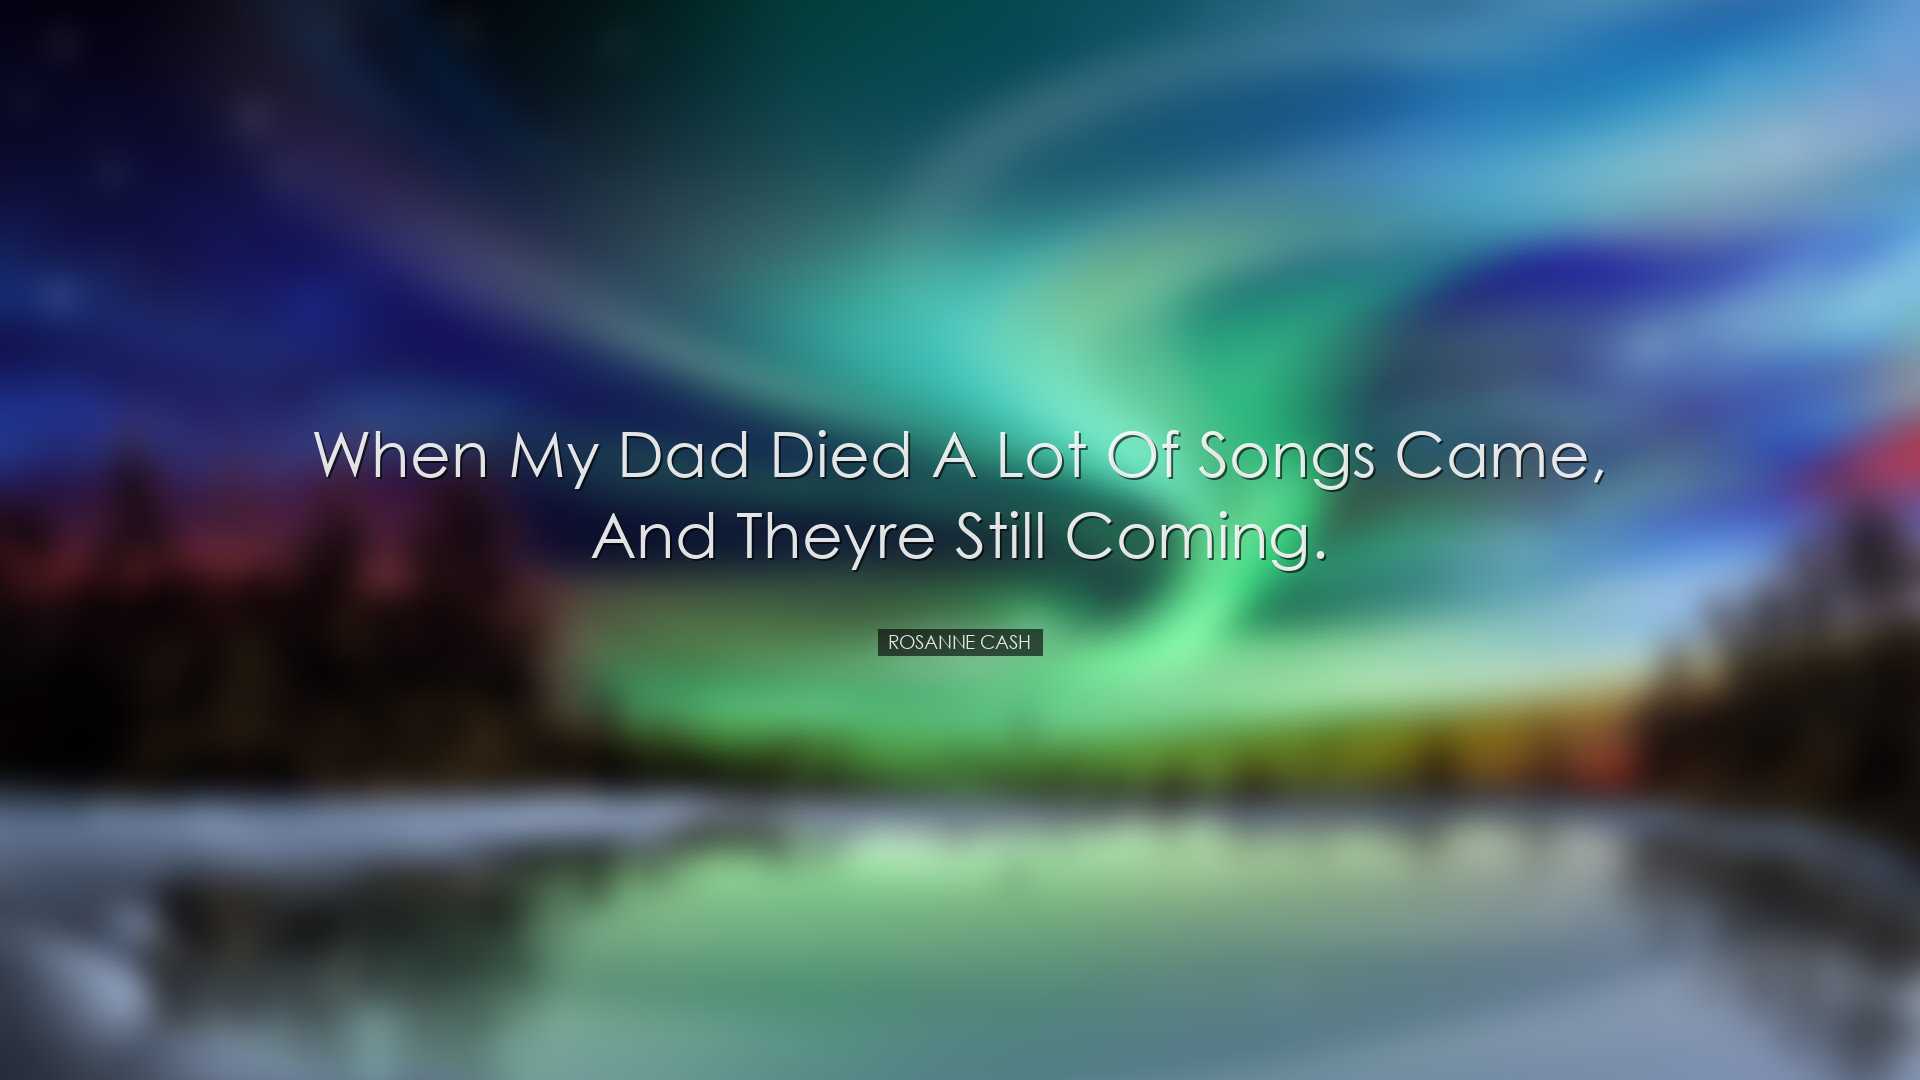 When my dad died a lot of songs came, and theyre still coming. - R